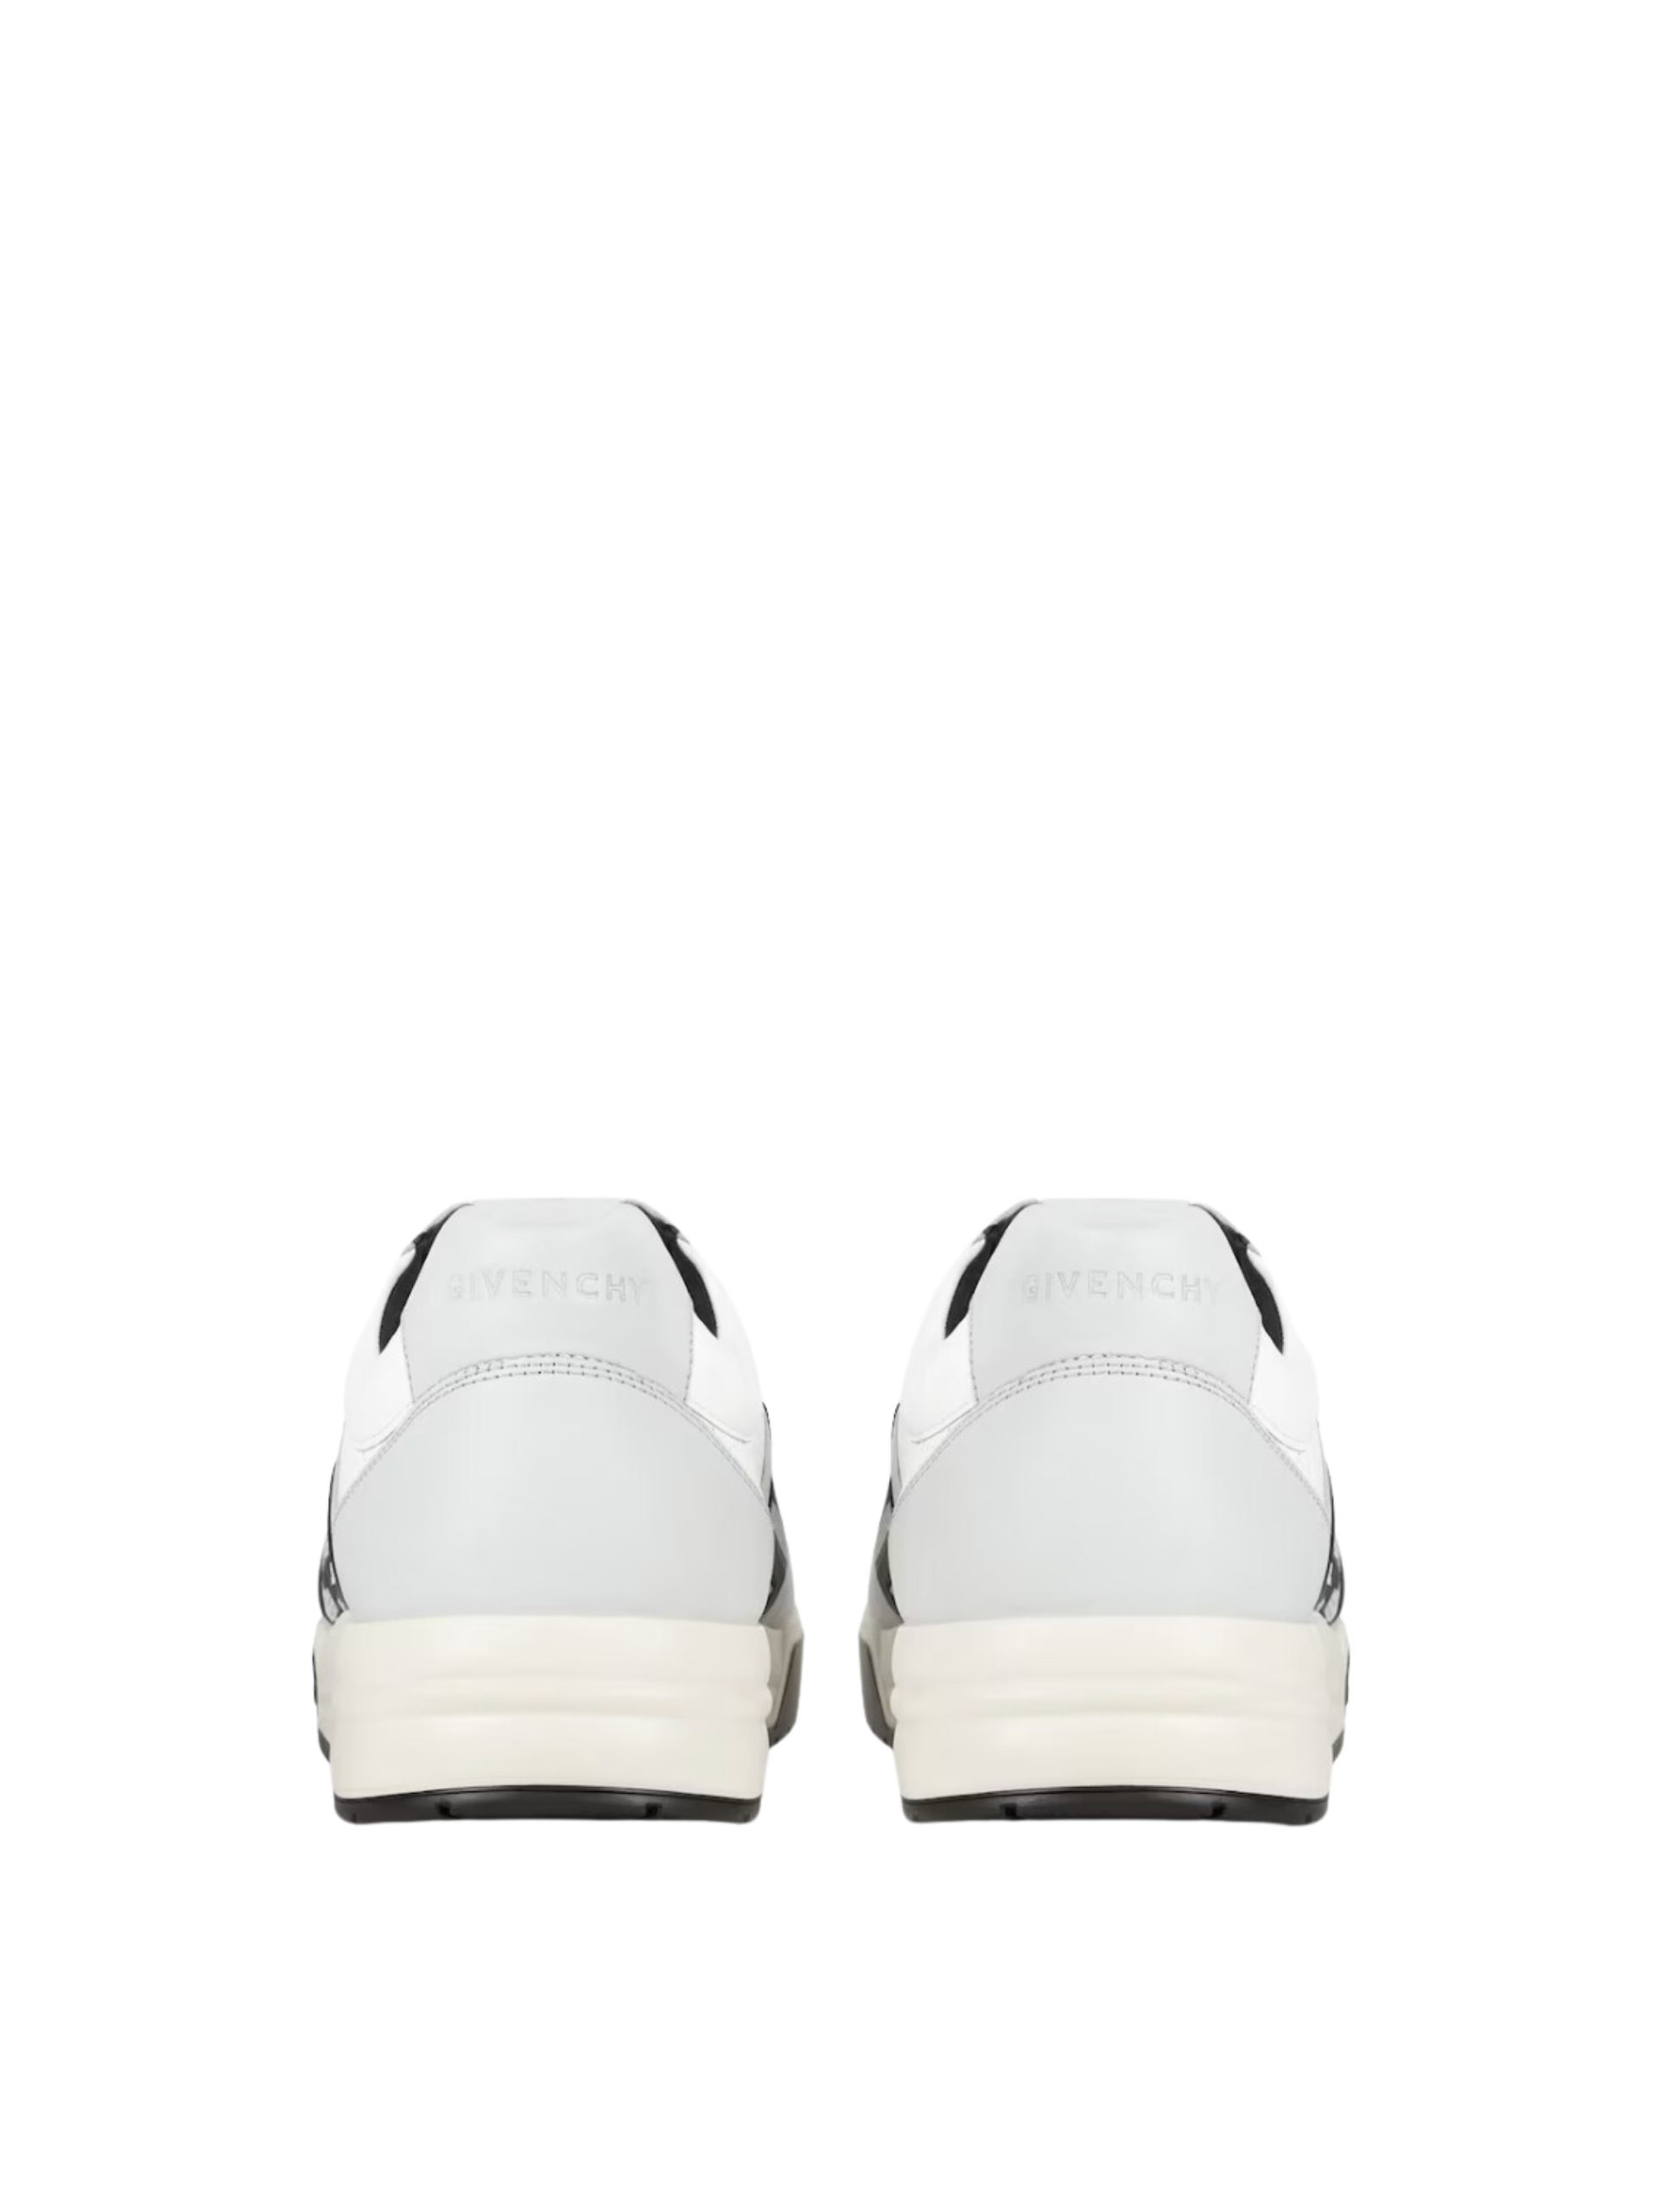 GIVENCHY Men’s G4 Low Top Sneakers